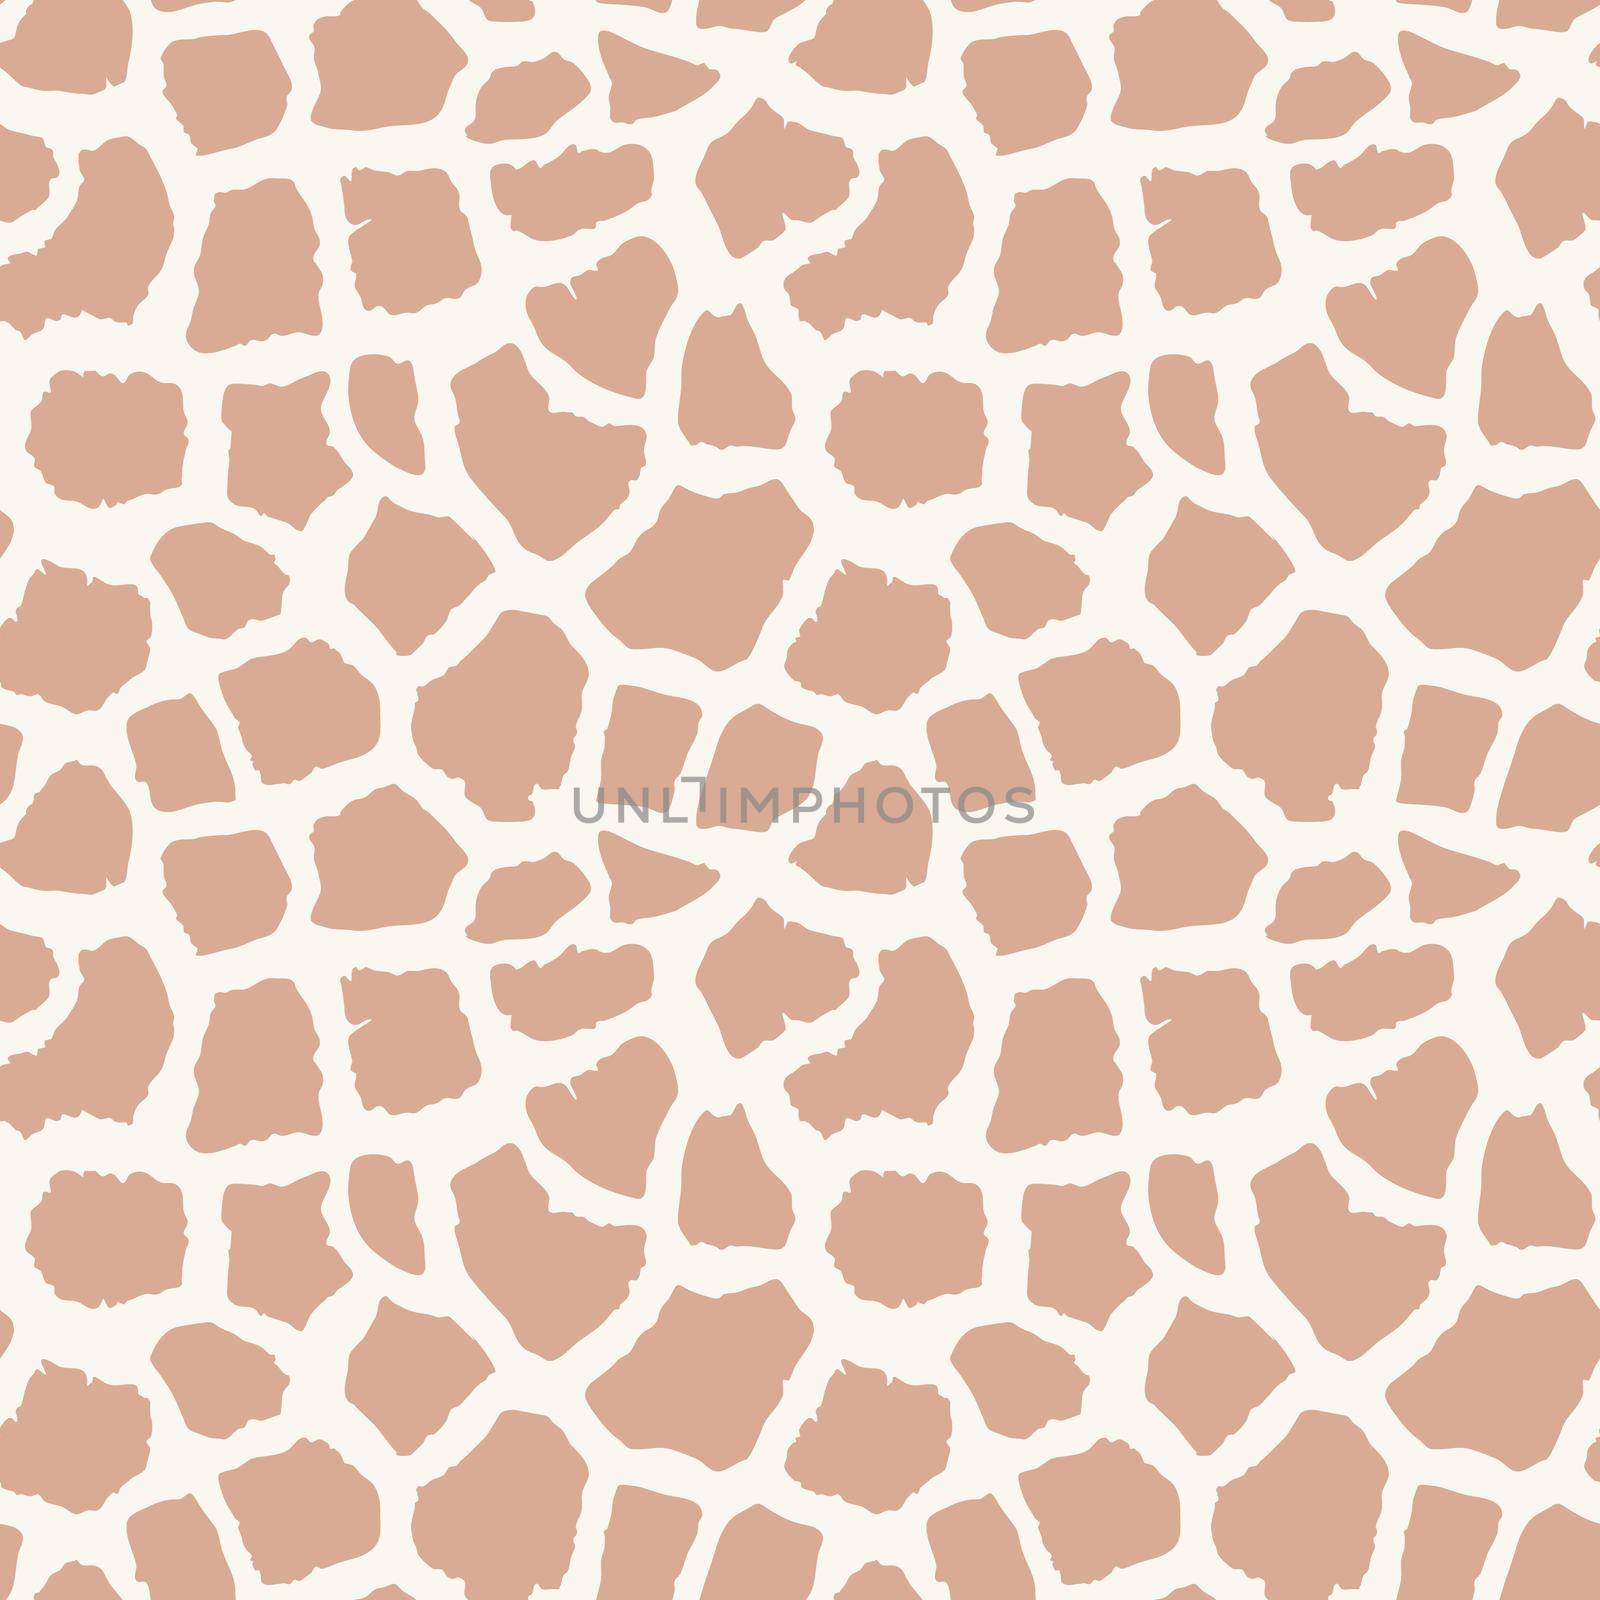 Abstract modern giraffe seamless pattern. Animals trendy background. Beige decorative vector stock illustration for print, card, postcard, fabric, textile. Modern ornament of stylized skin. by allaku